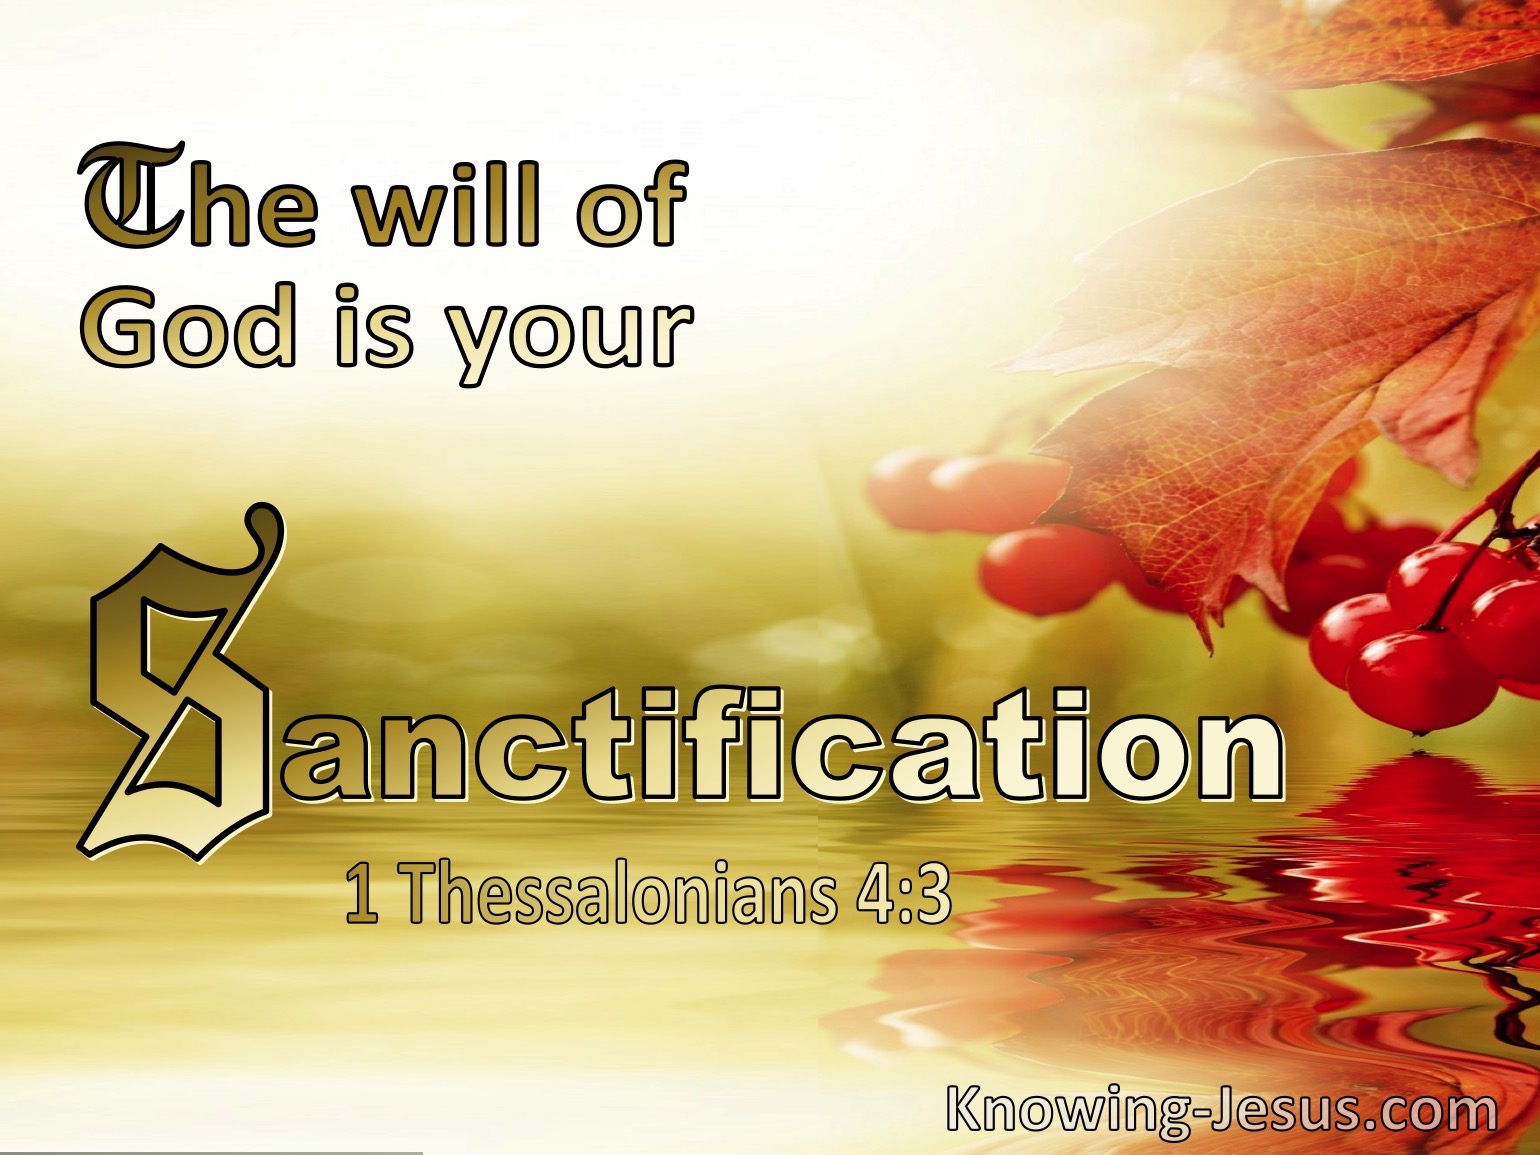 What Does 1 Thessalonians 4:3 Mean?